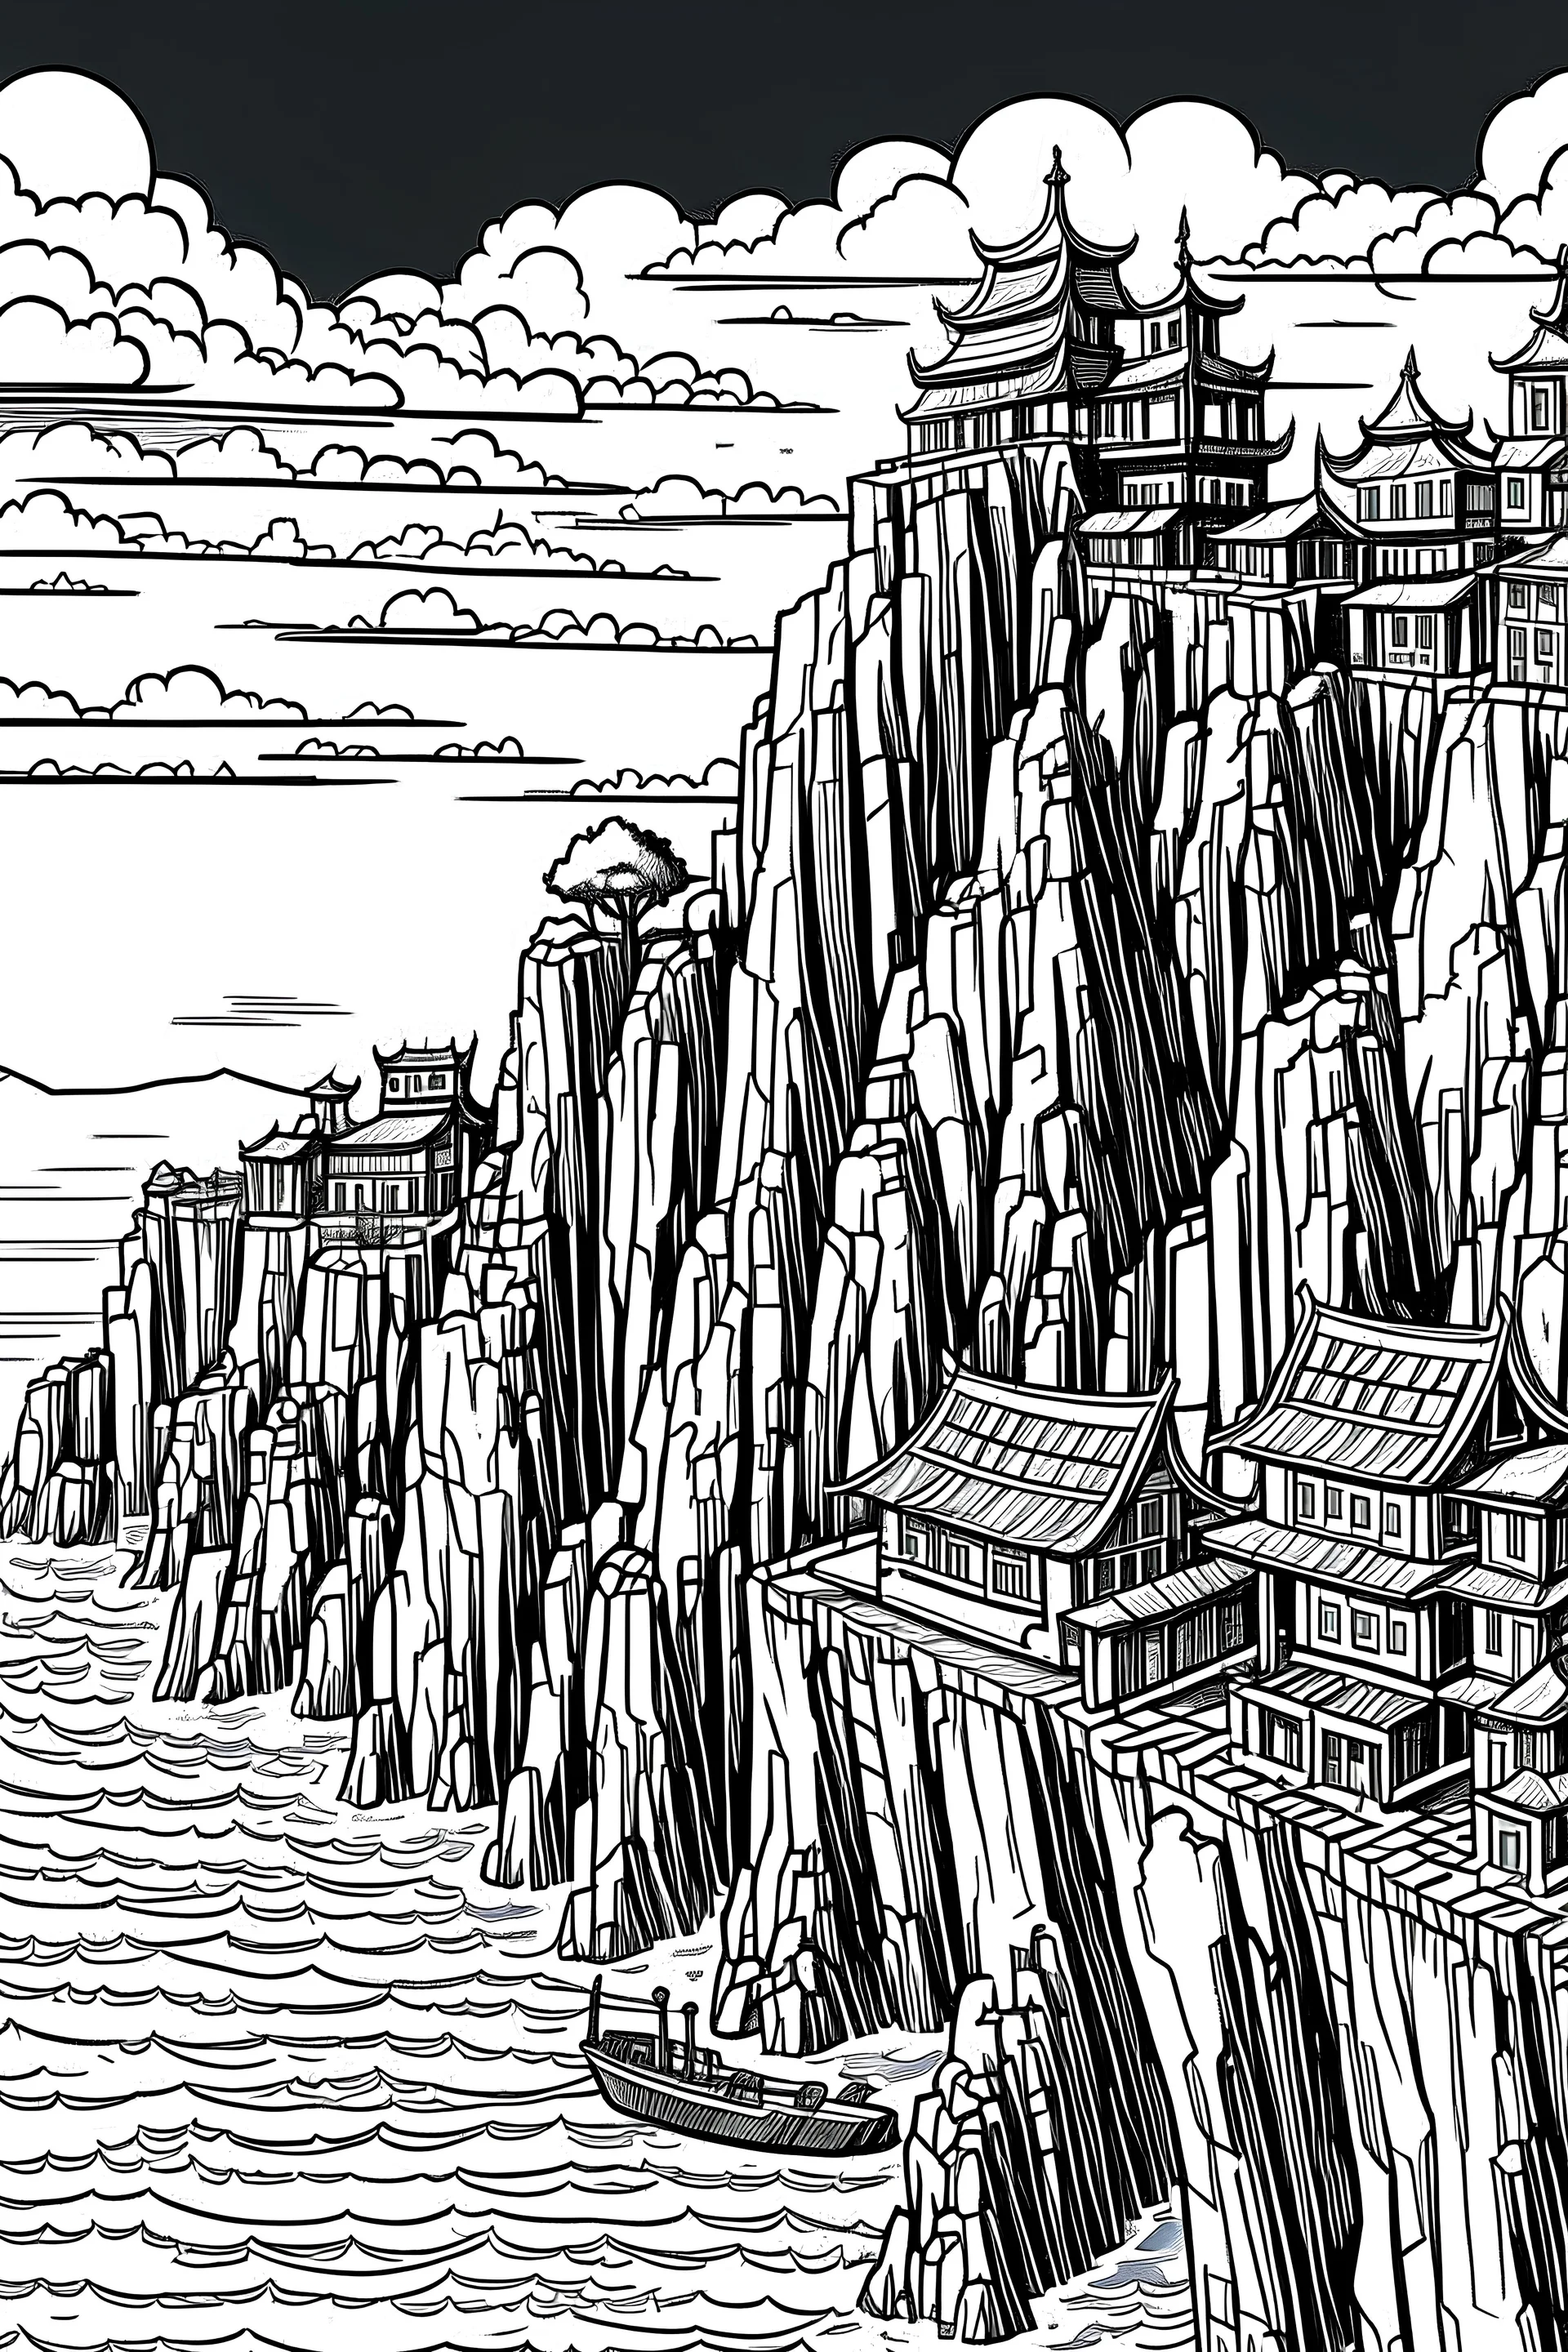 A village on a steep cliff high above water, black and white, in the style of Hokusai